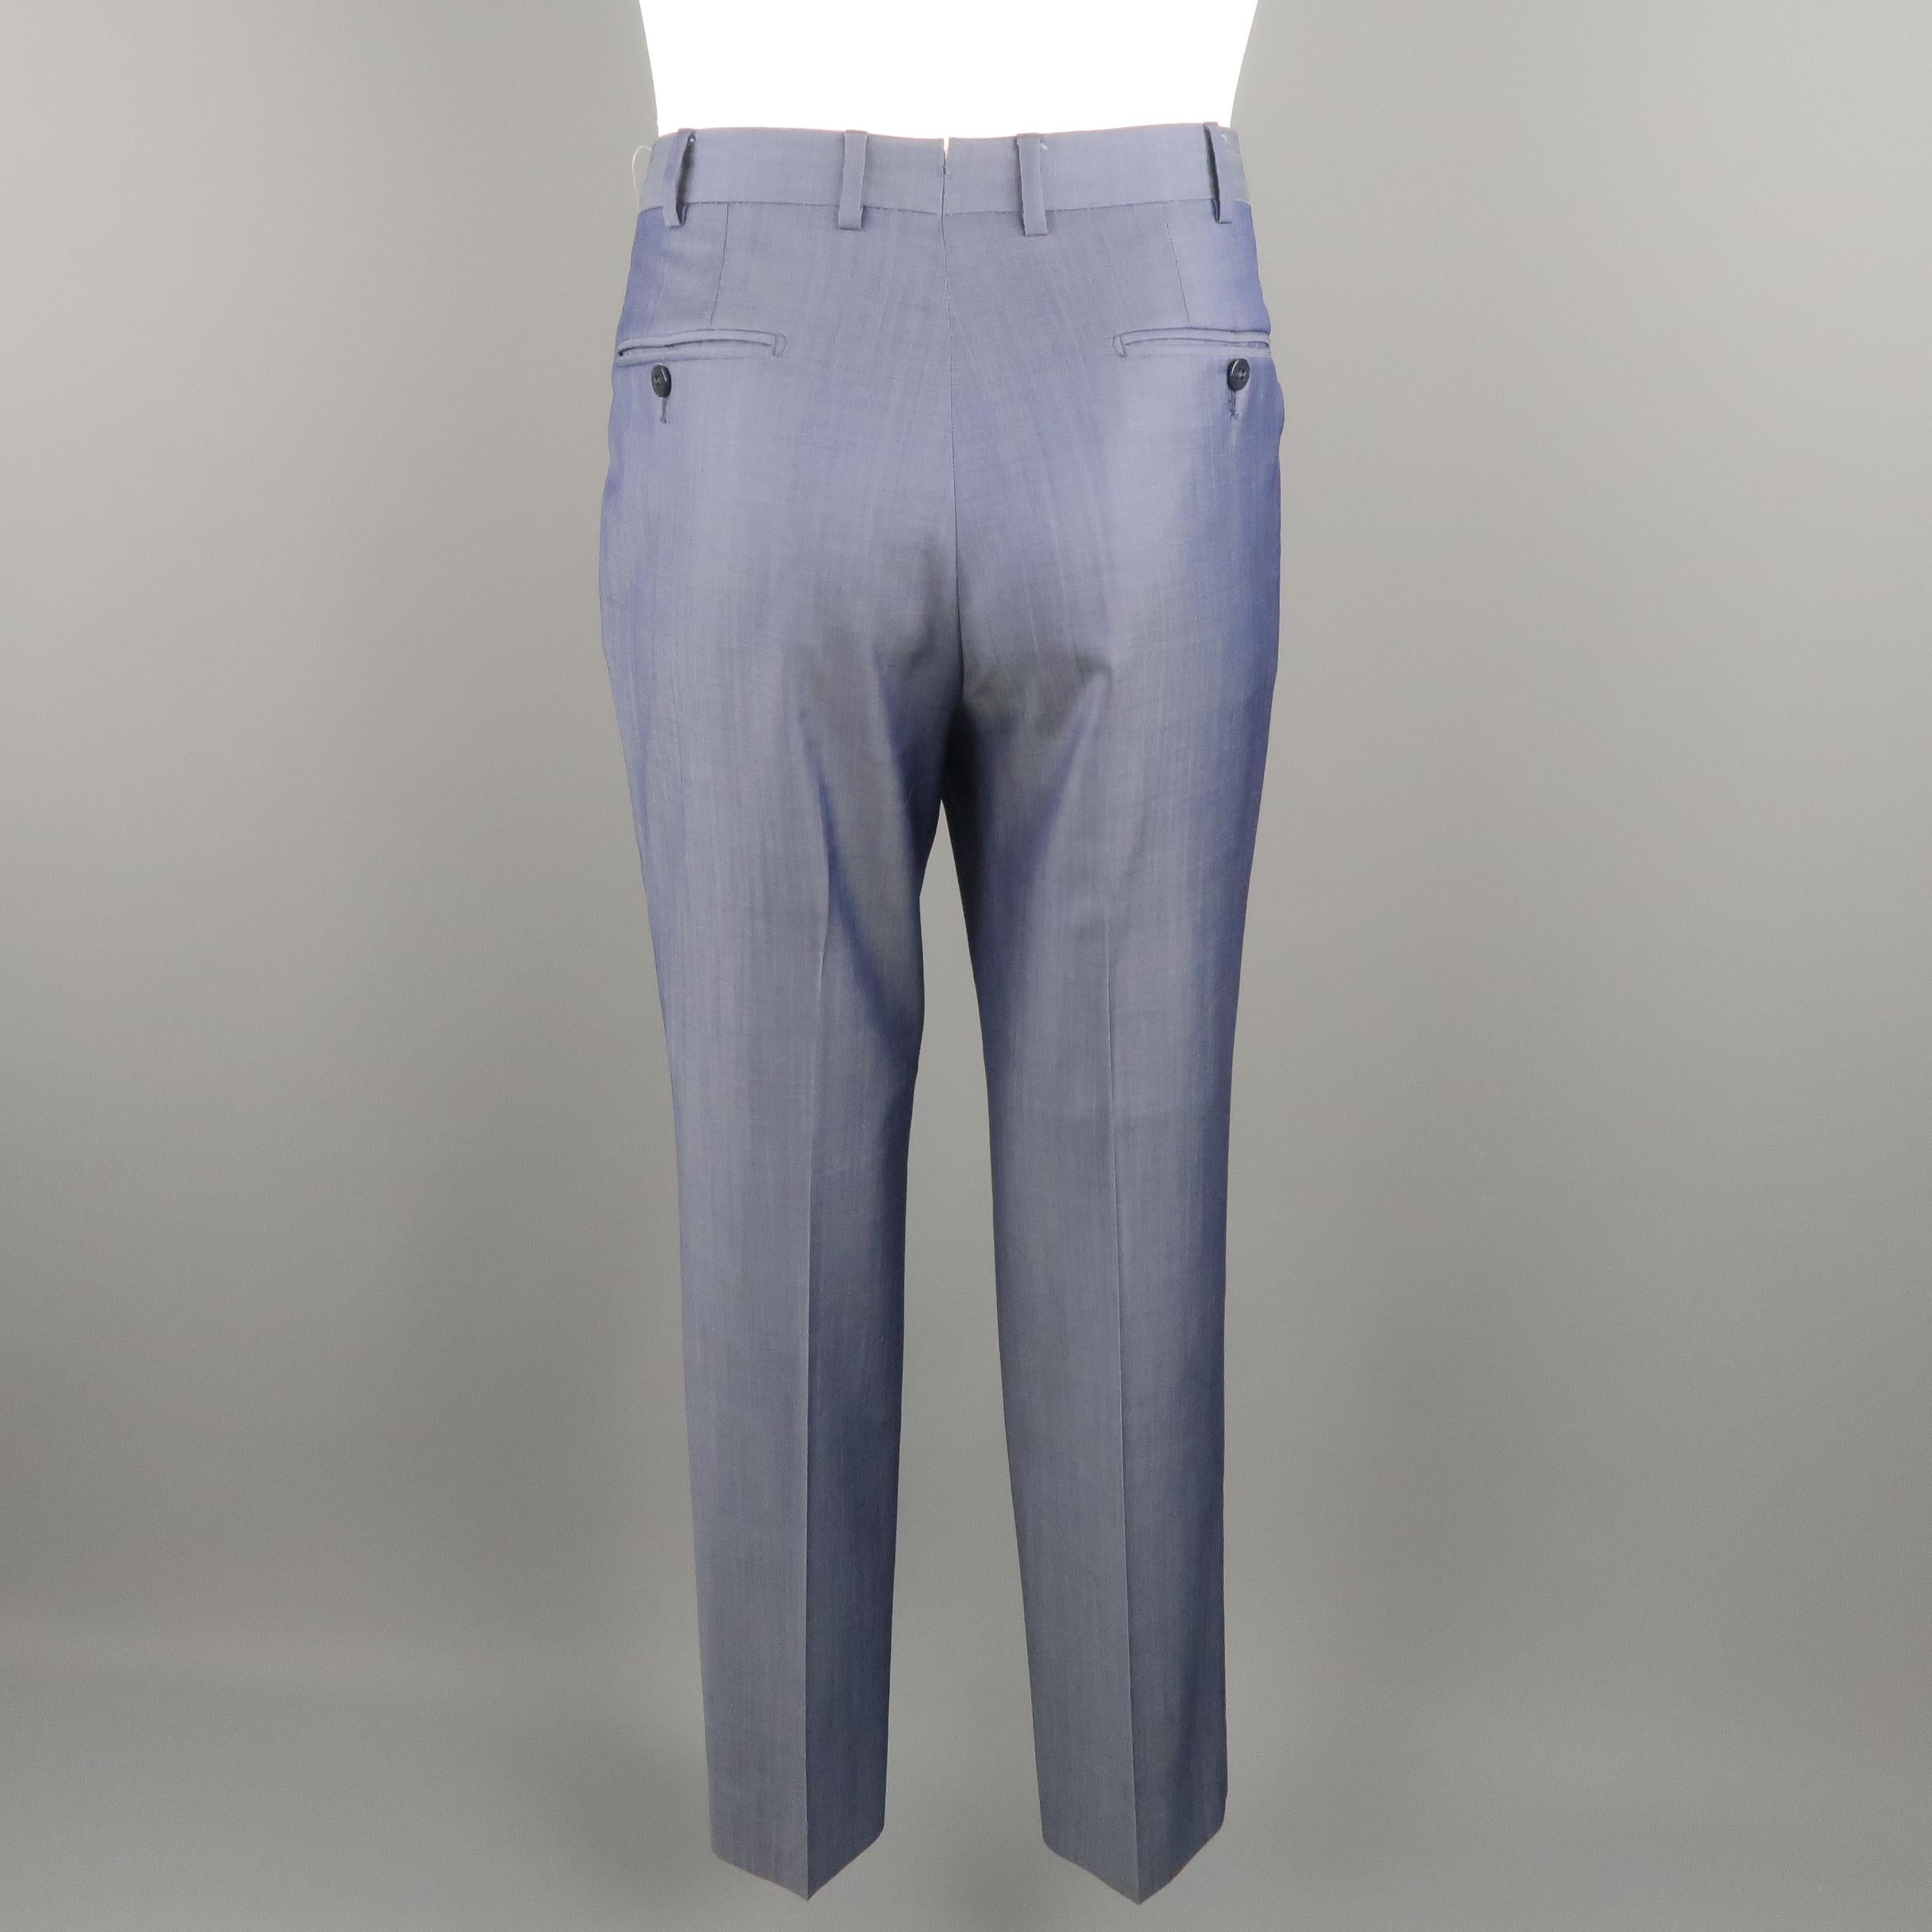 ERMENEGILDO ZEGNA dress pants in a steel blue tone, solid wool with a waistband, and slant side pockets. Made in Spain.
 
Excellent Pre-Owned Condition.
Marked: 6 - 48 R  IT
 
Measurements:
 
Waist: 33 in.
Rise: 10.5 in.
Inseam: 31 in.